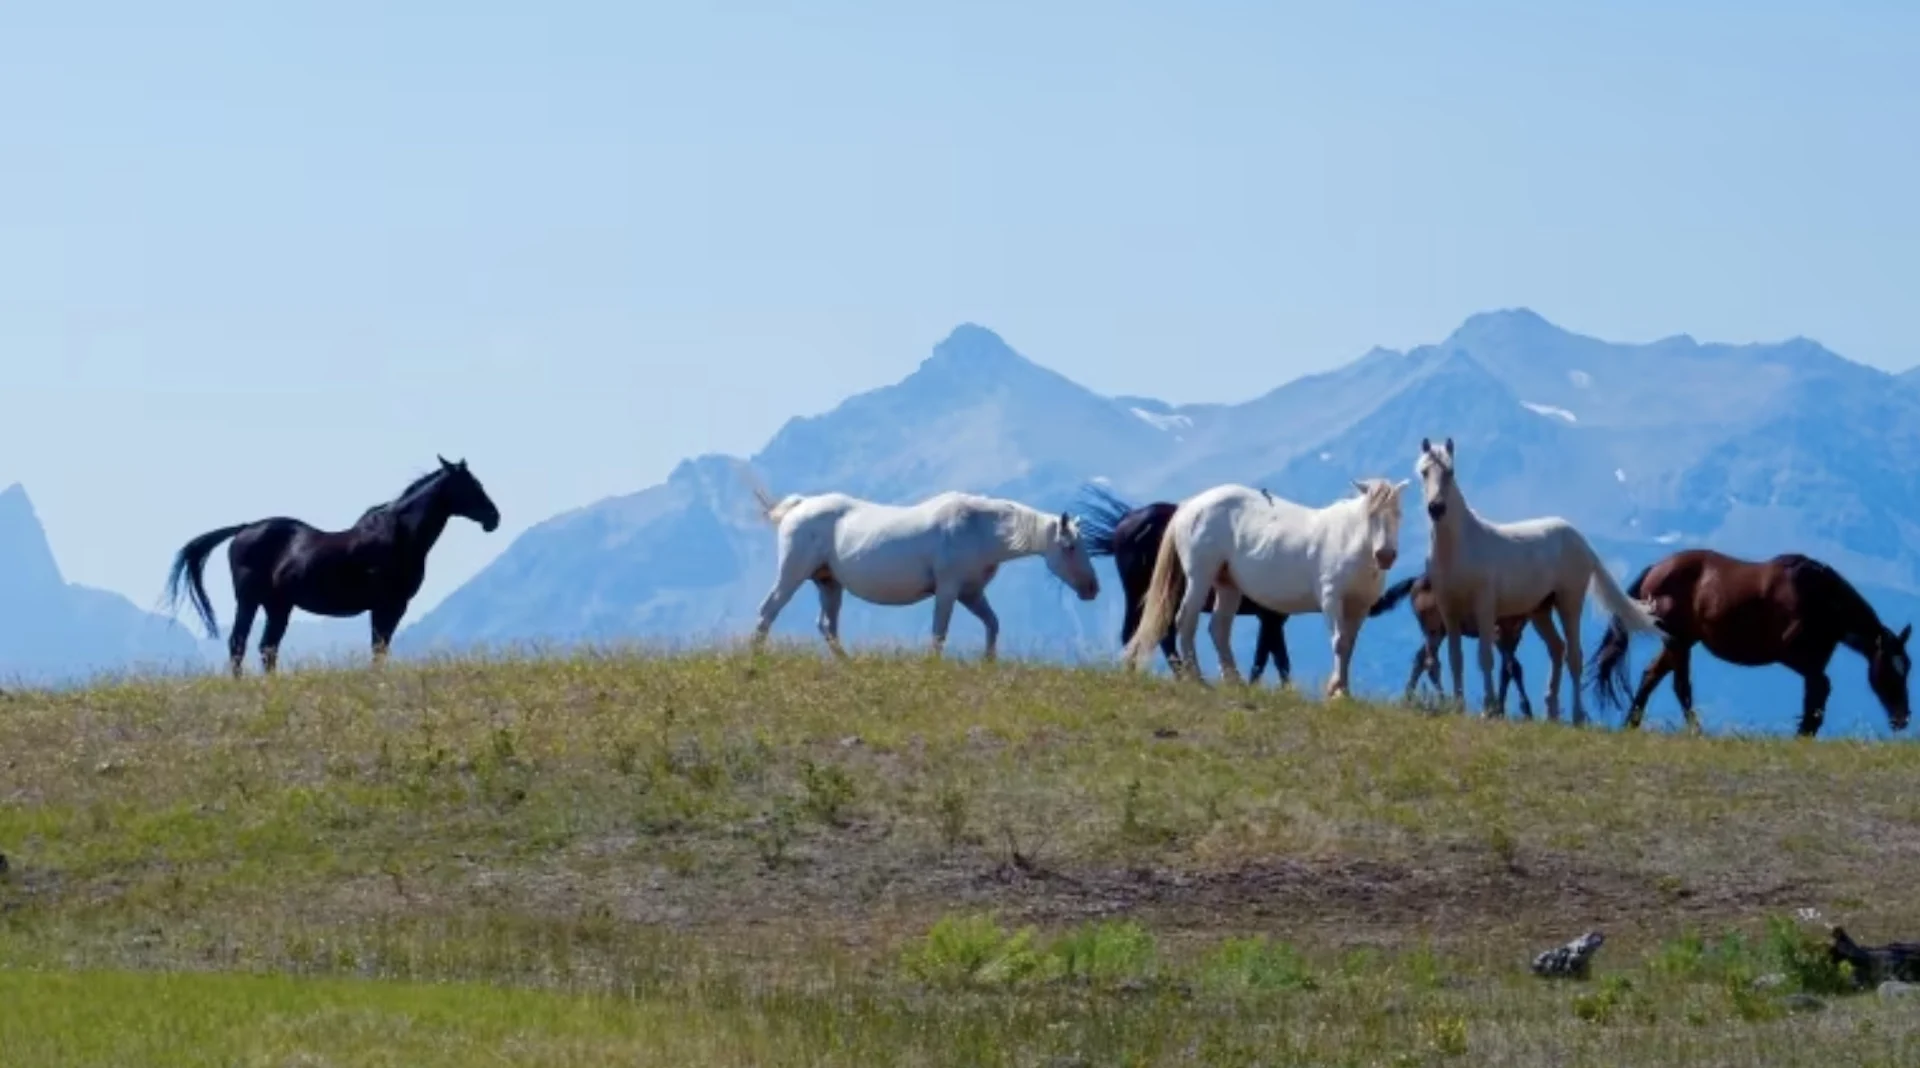 Free-roaming horses are feral and invasive, B.C. says, but some want protection